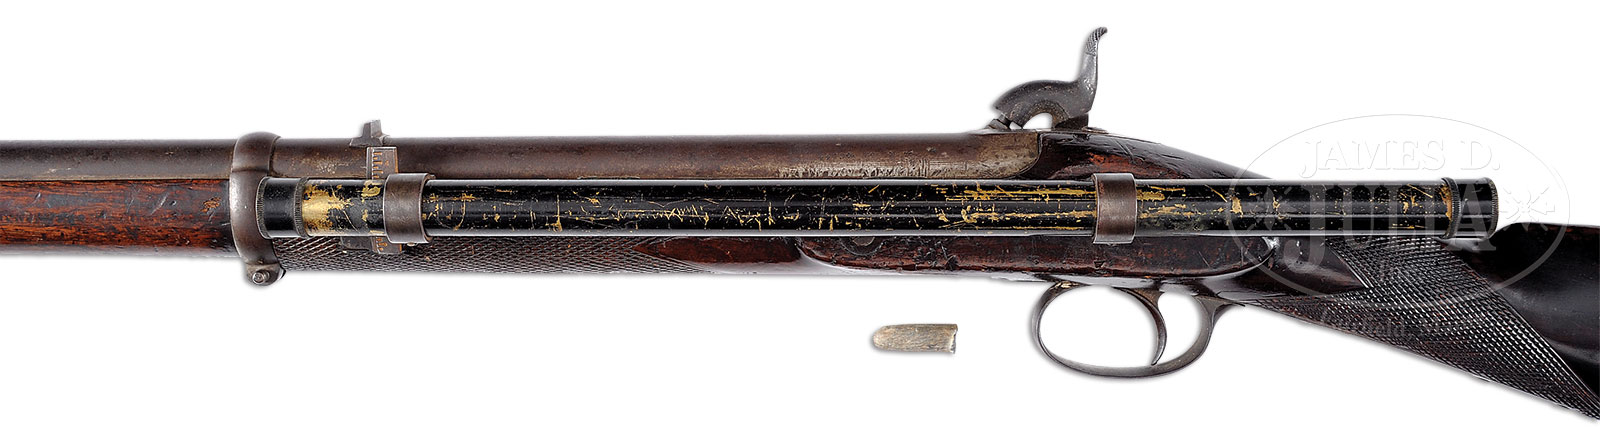 EXTREMELY RARE CONFEDERATE SCOPED 2ND QUALITY WHITWORTH SHARP SHOOTER’S RIFLE.